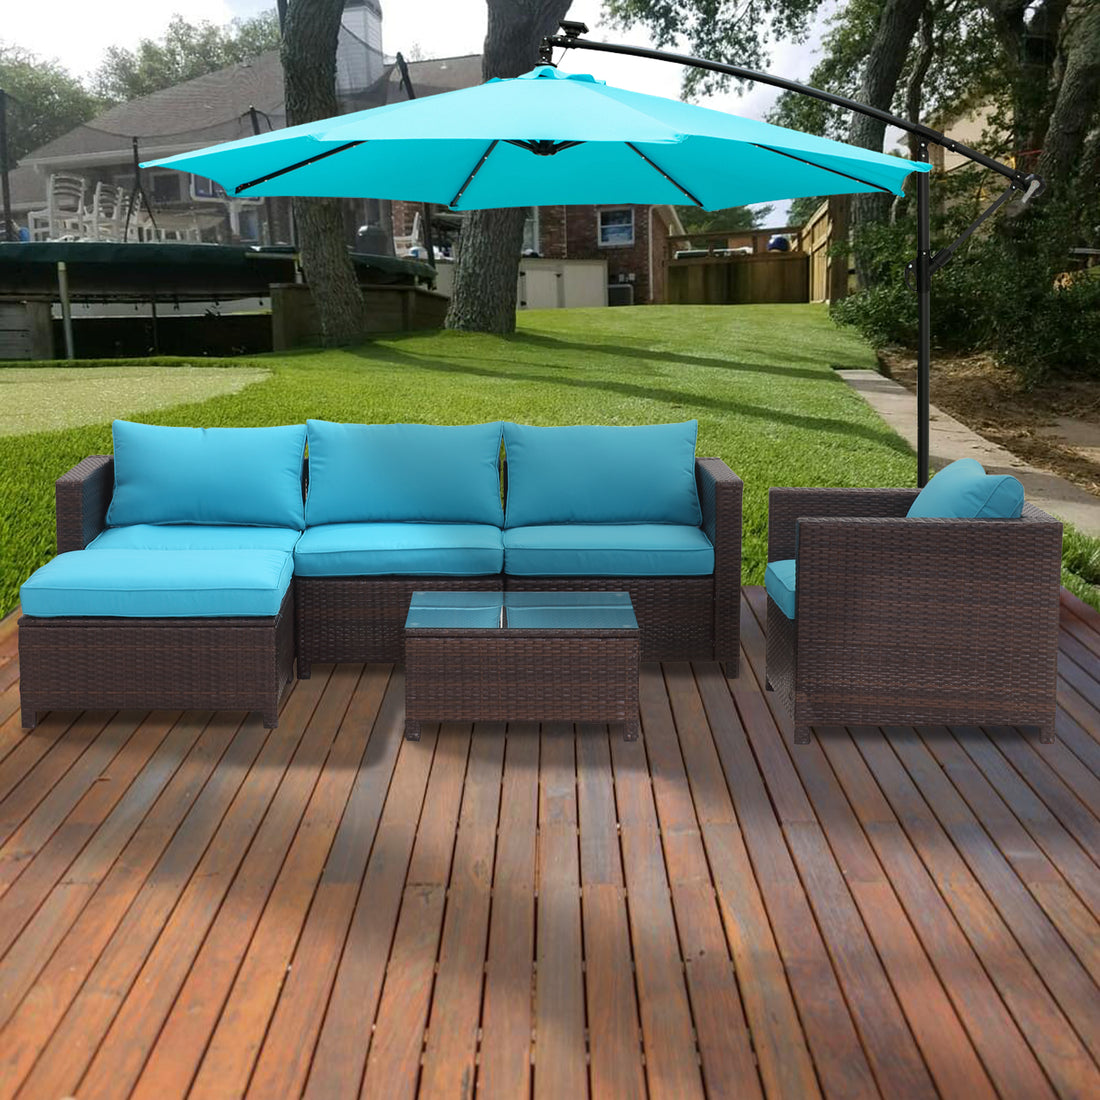 Buyers Guide For Finding The Best Deals On Outdoor Furniture